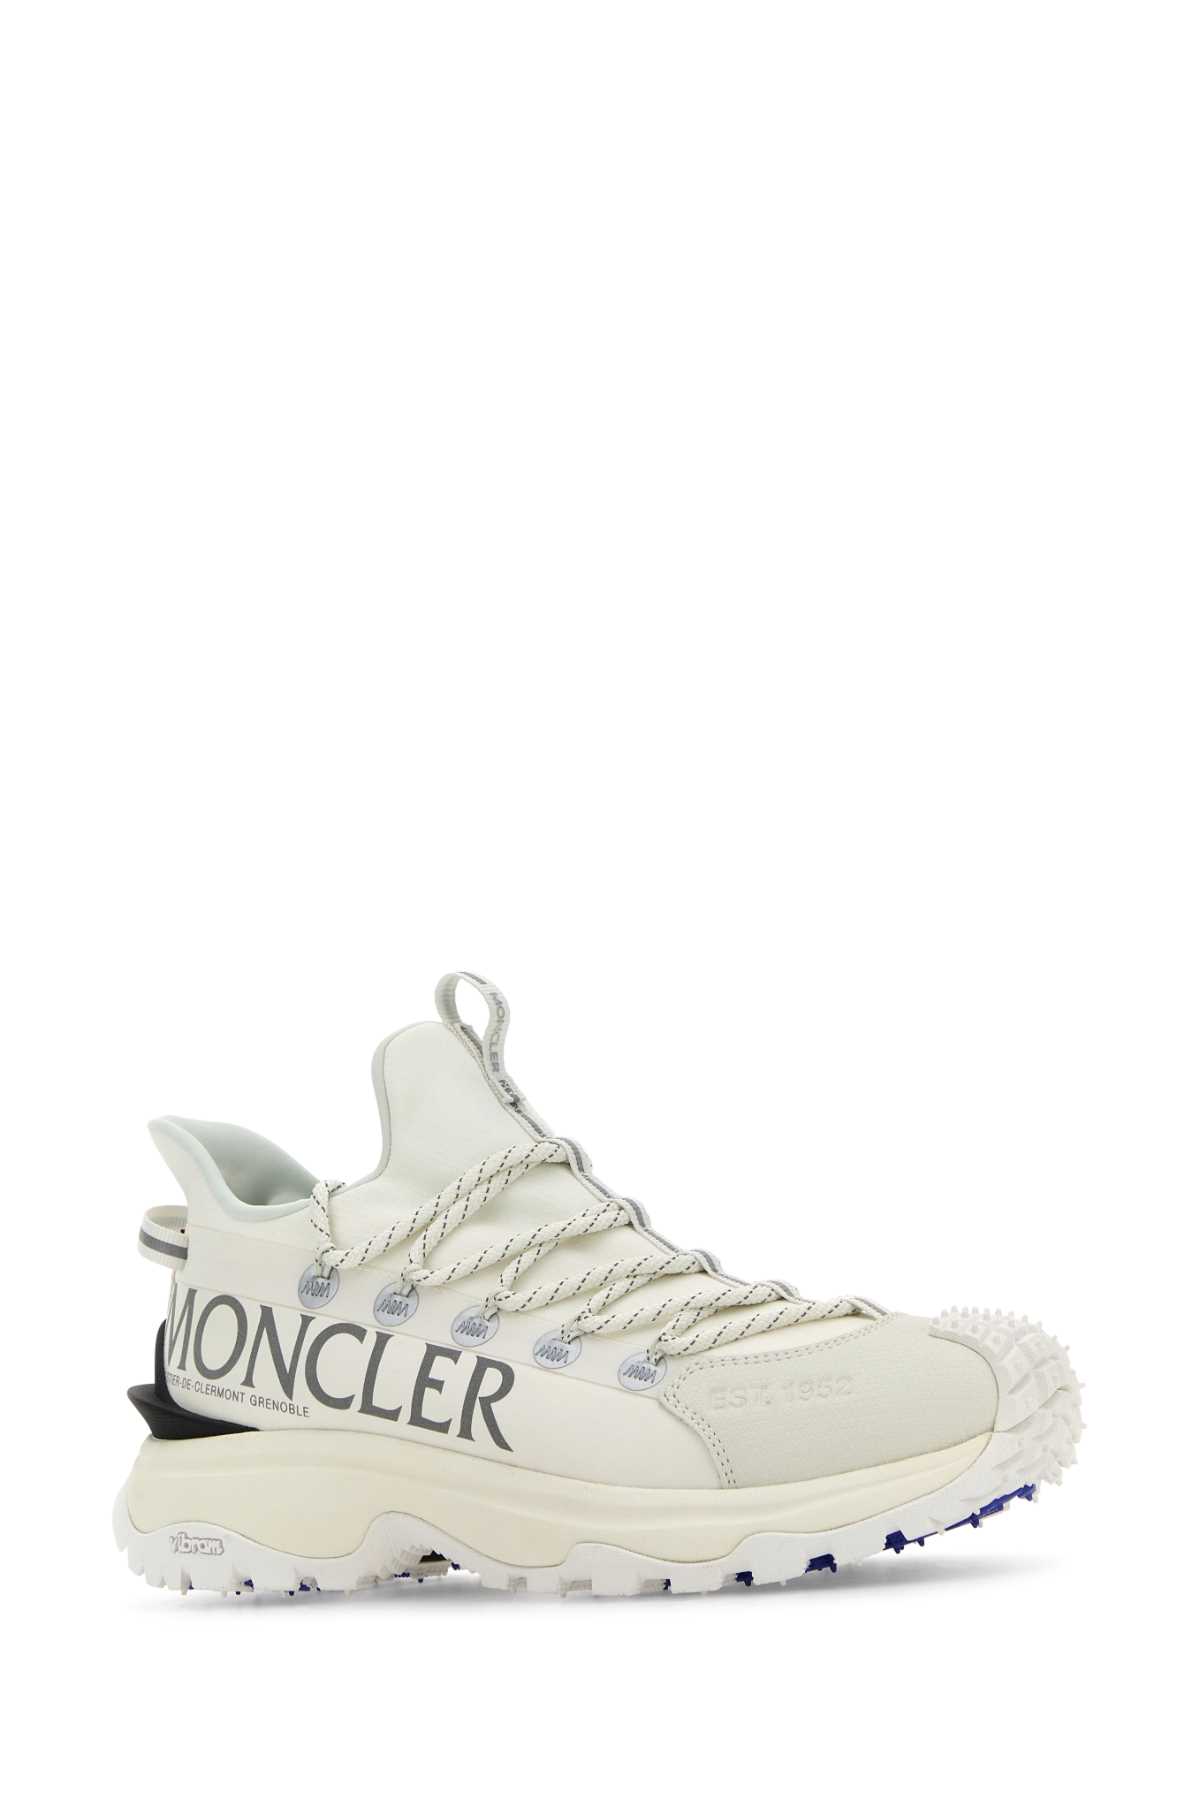 MONCLER WHITE FABRIC AND RUBBER TRAILGRIP LITE2 SNEAKERS